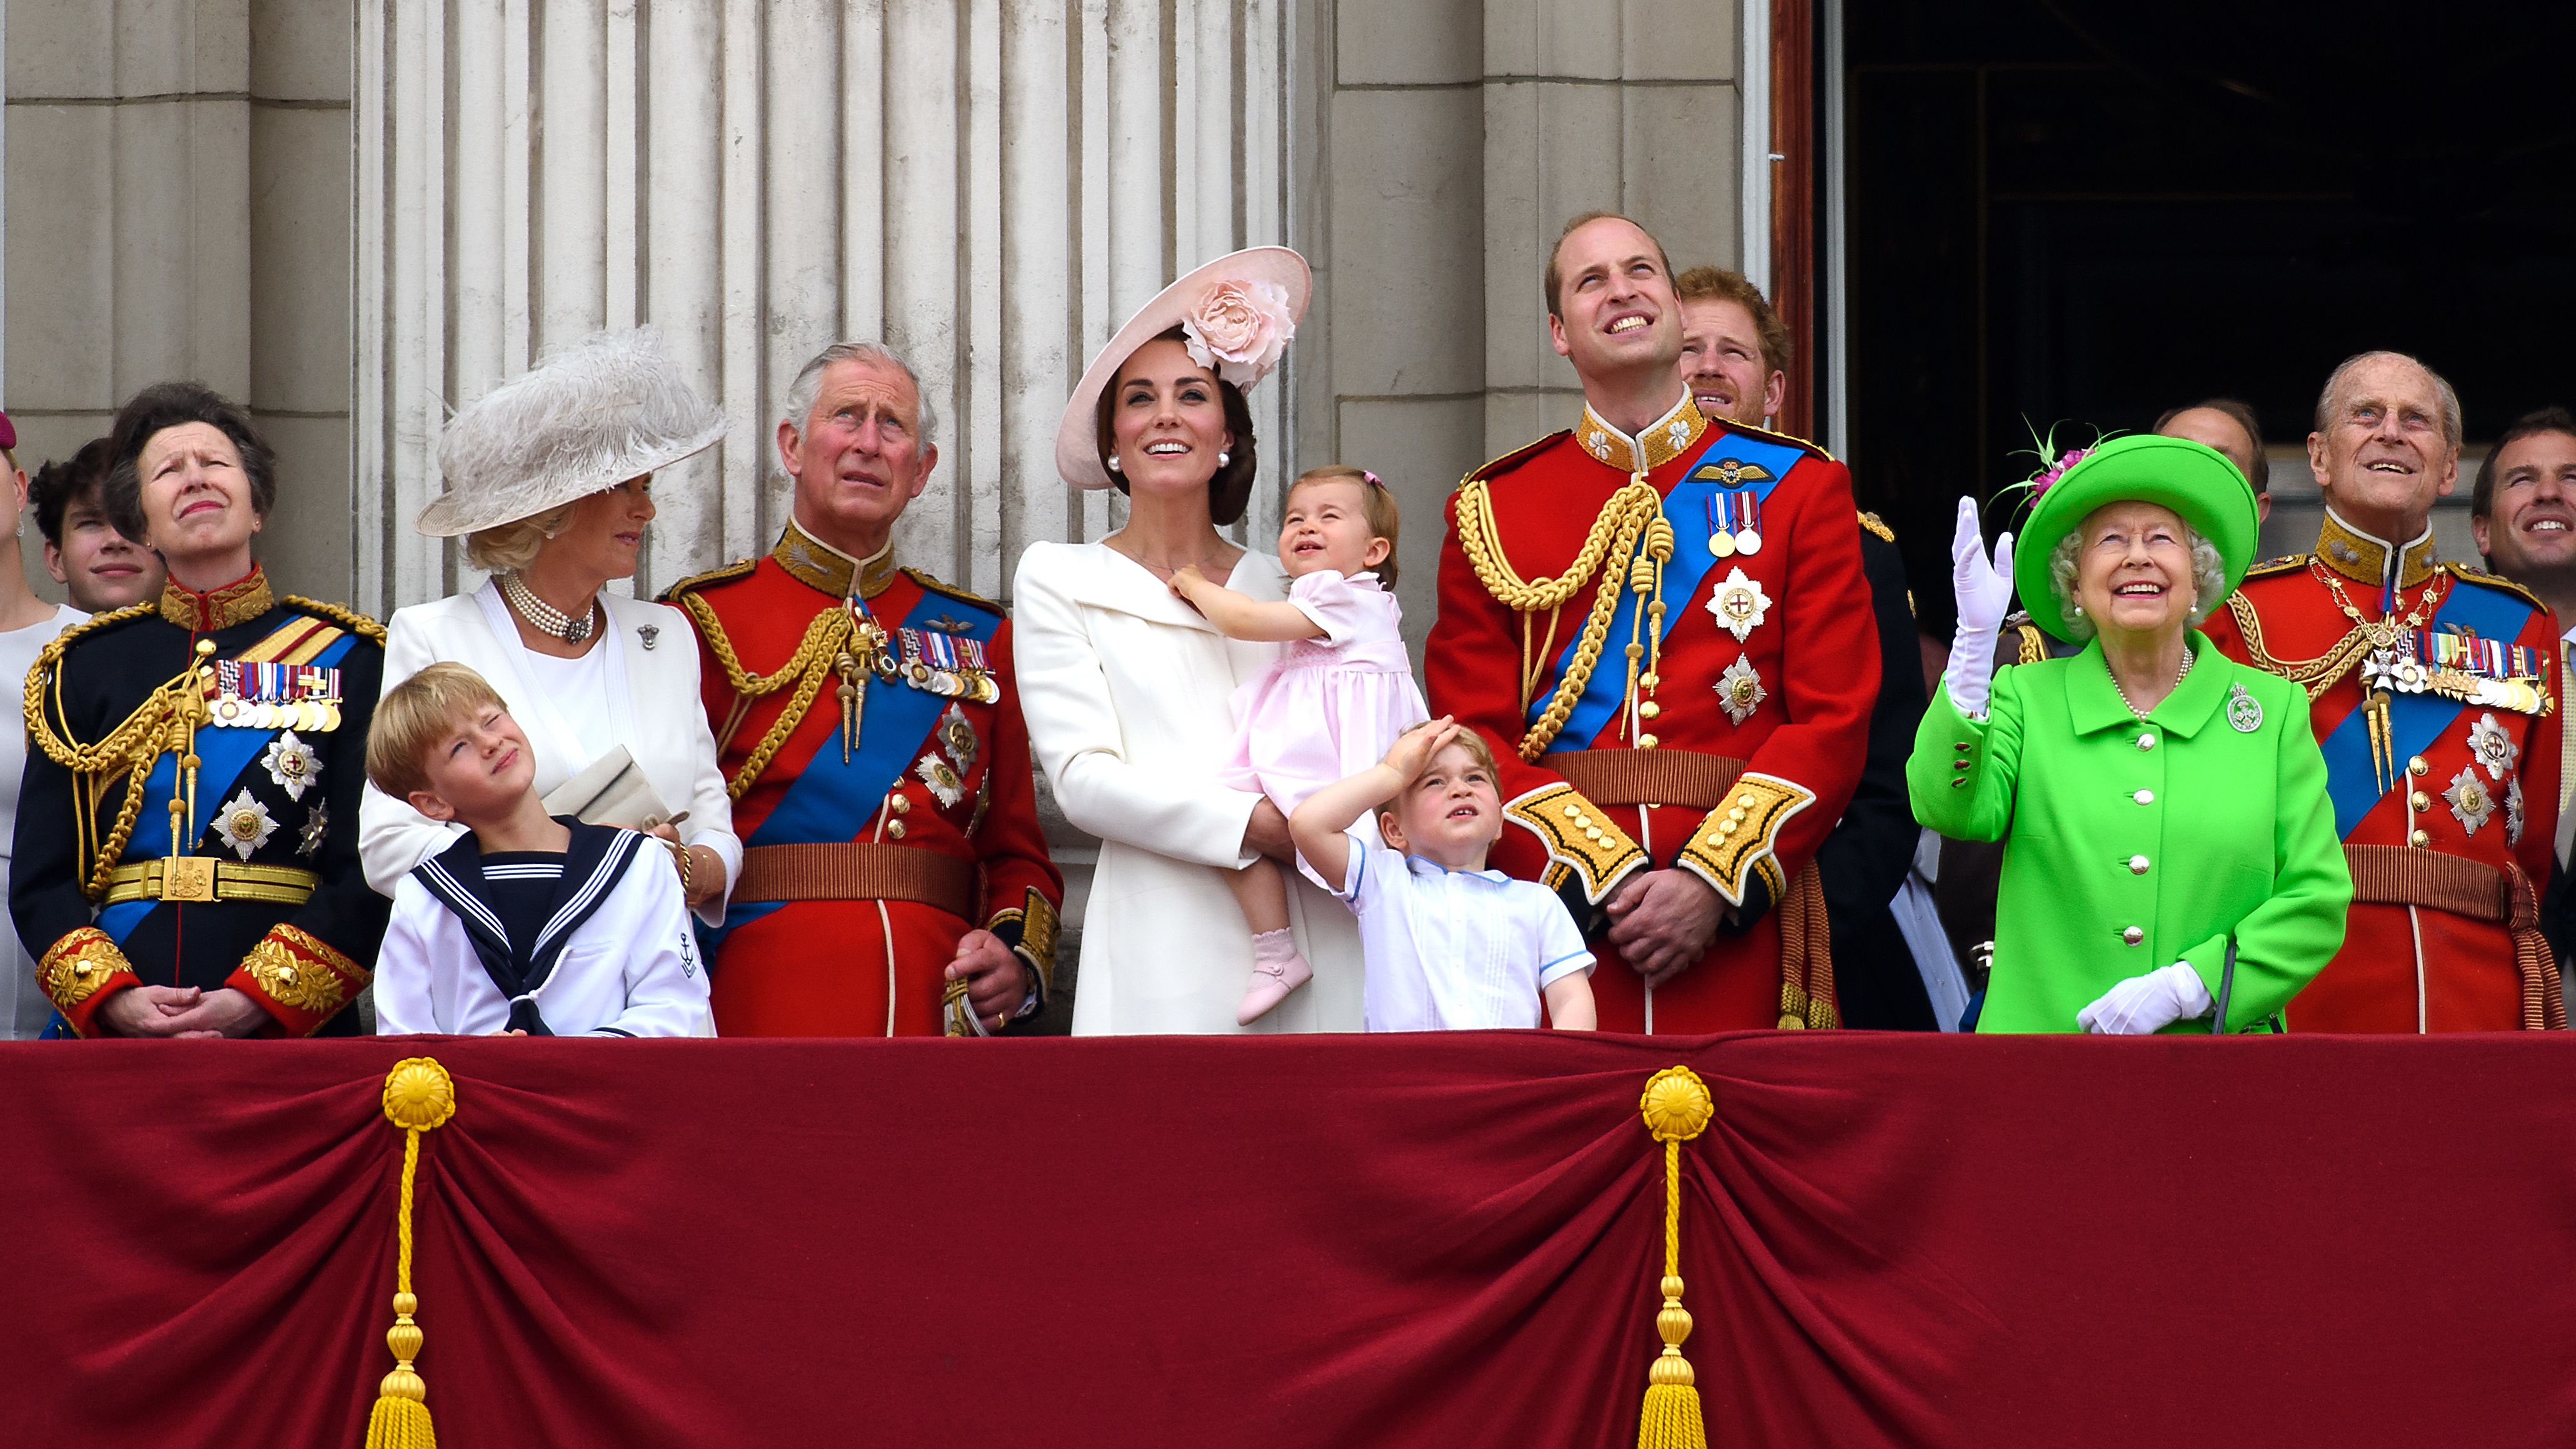 Members of the royal family gather on a balcony in June 2016 during celebrations marking the 90th birthday of Queen Elizabeth II. Catherine is holding Charlotte.